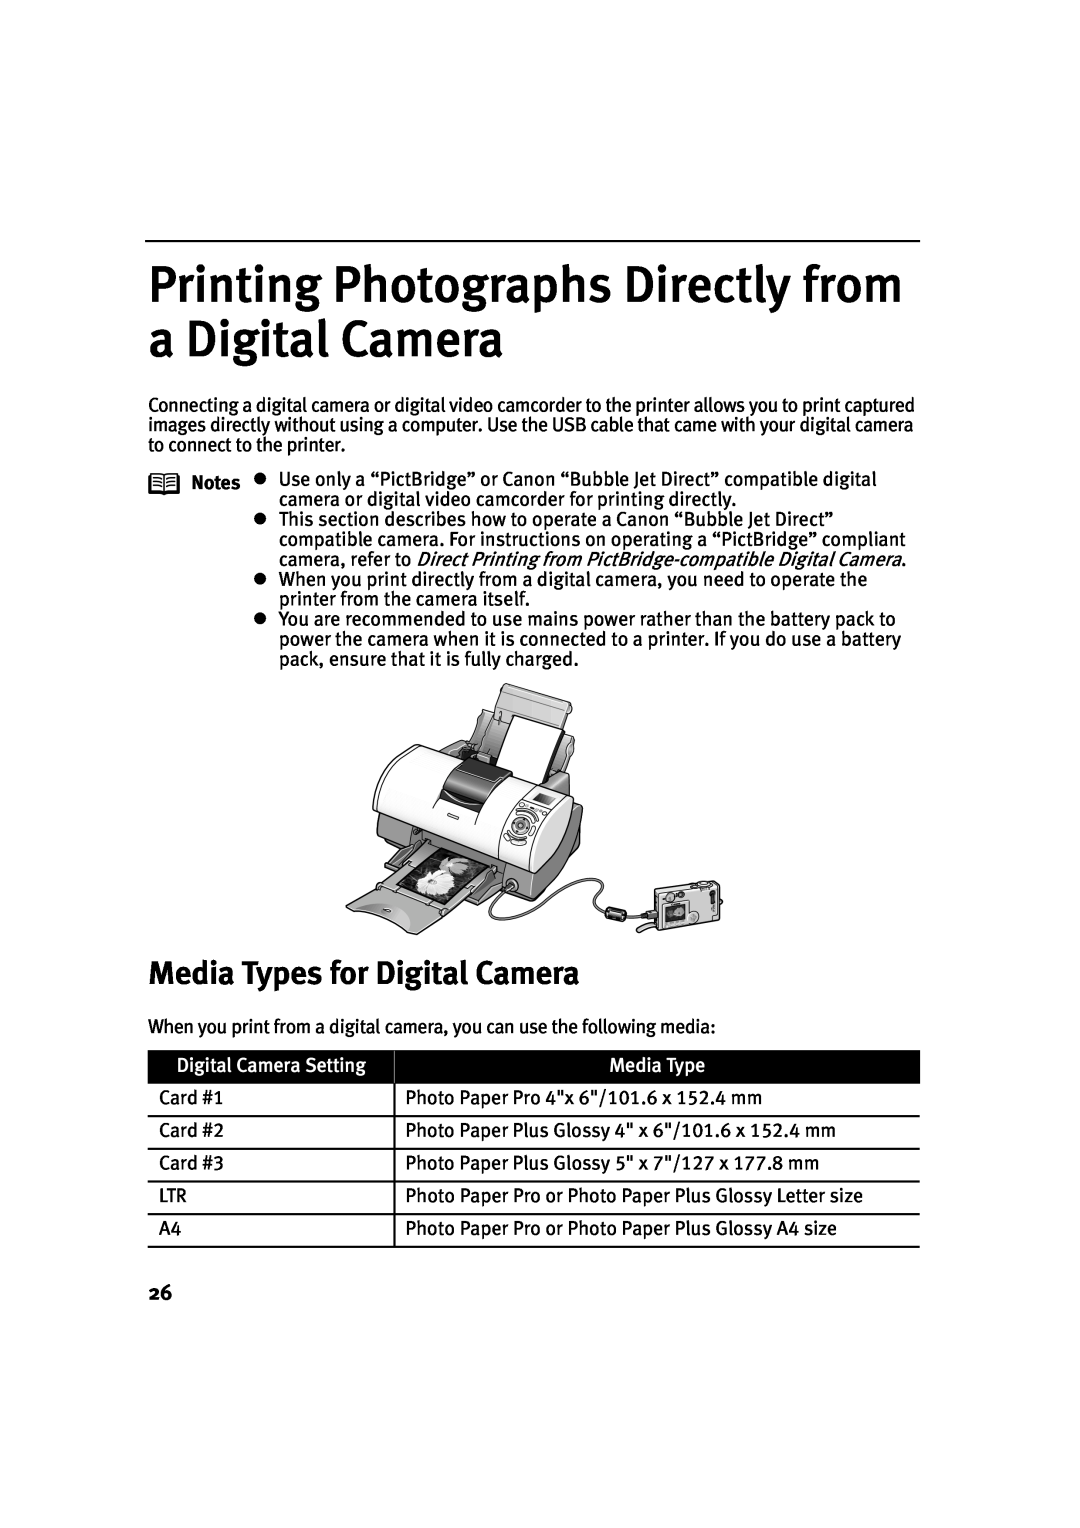 Canon 900D Printing Photographs Directly from a Digital Camera, Media Types for Digital Camera, Digital Camera Setting 